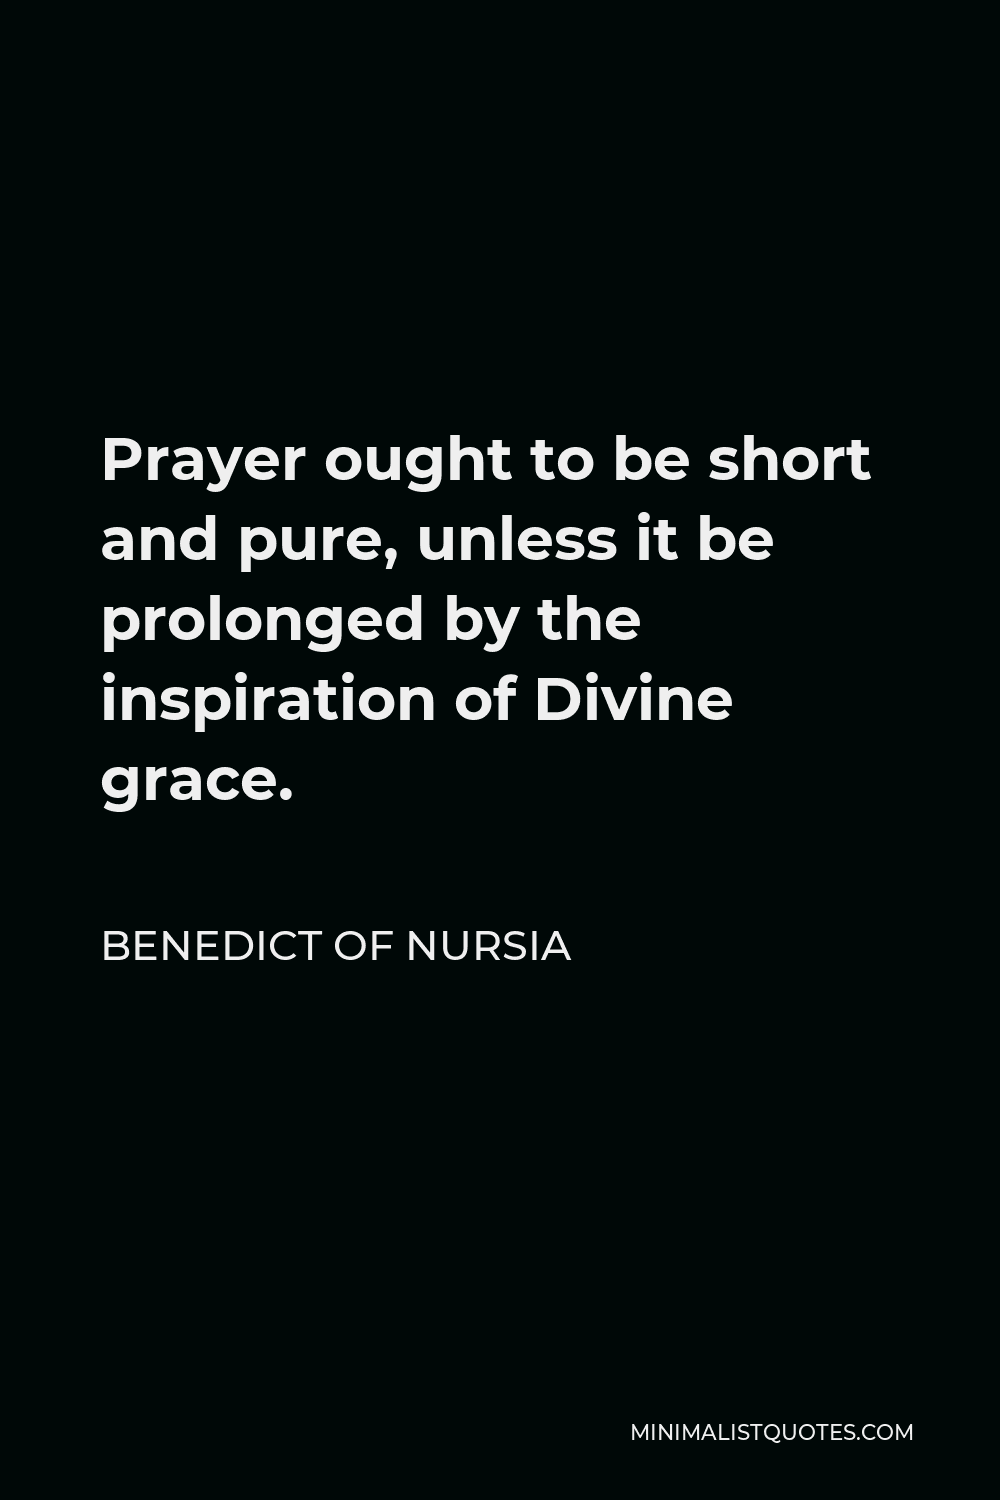 Benedict of Nursia Quote - Prayer ought to be short and pure, unless it be prolonged by the inspiration of Divine grace.